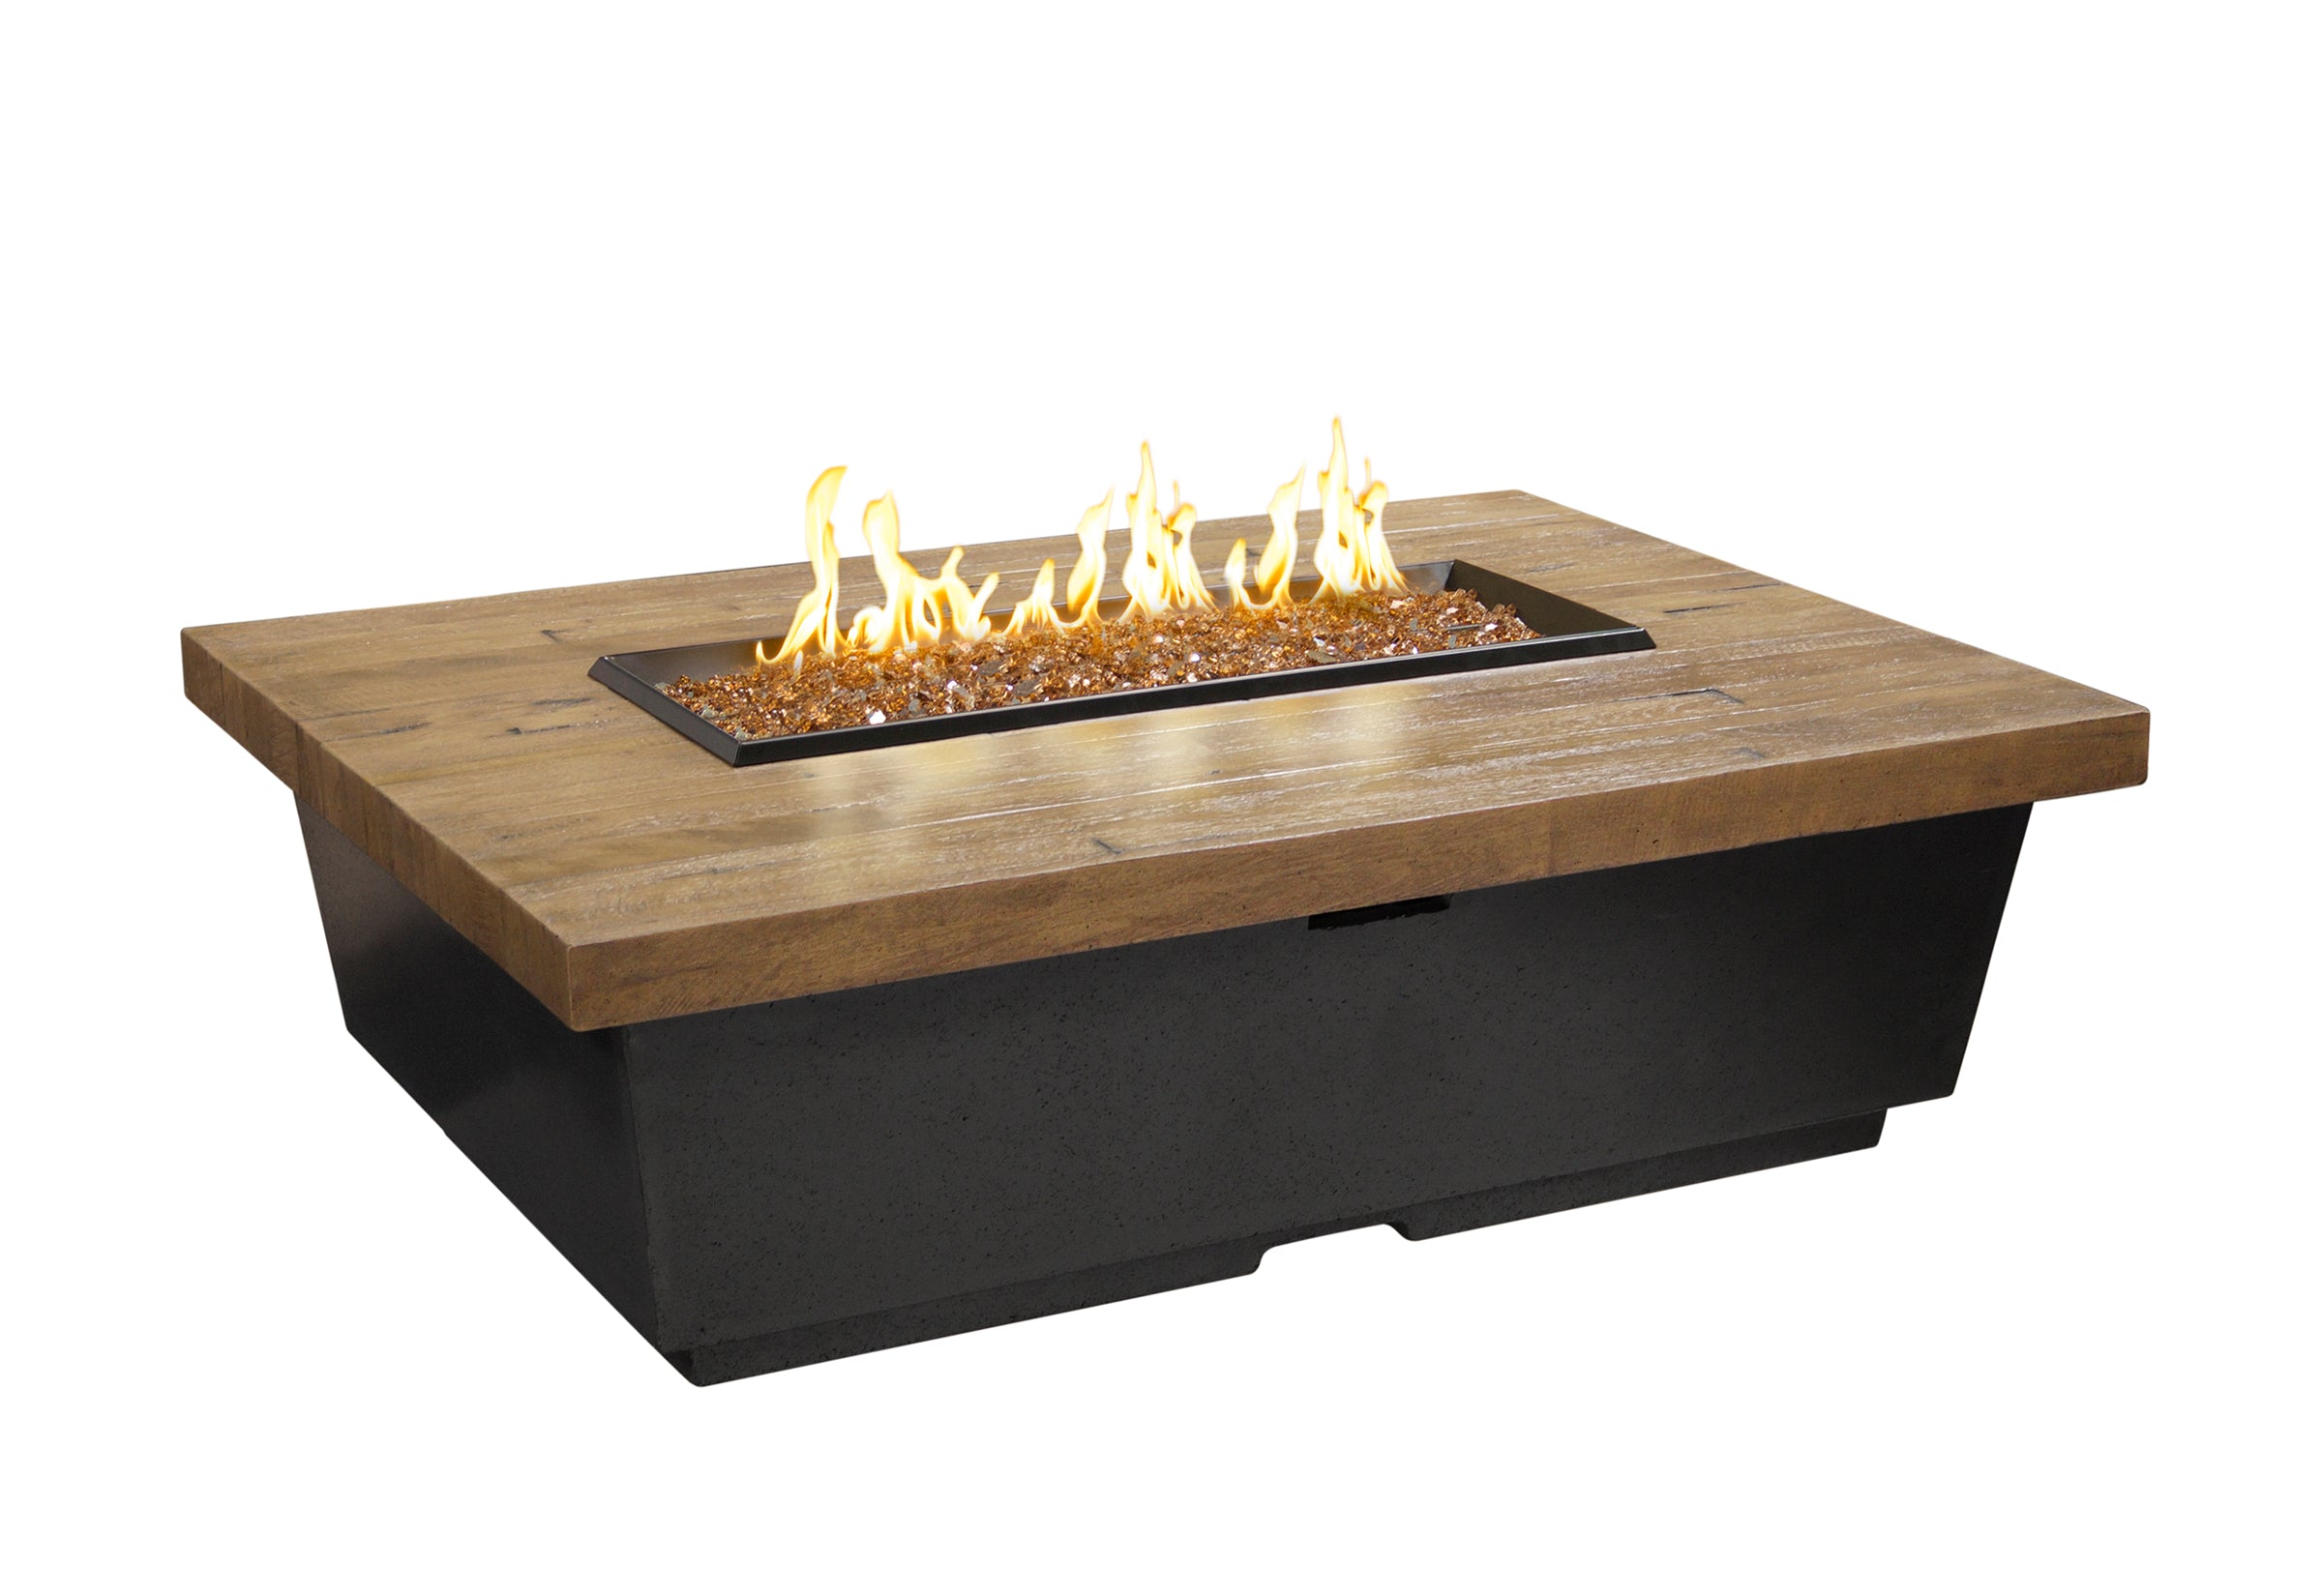 52" x 36" Contempo Rectangle Fire table  by American Fyre Design